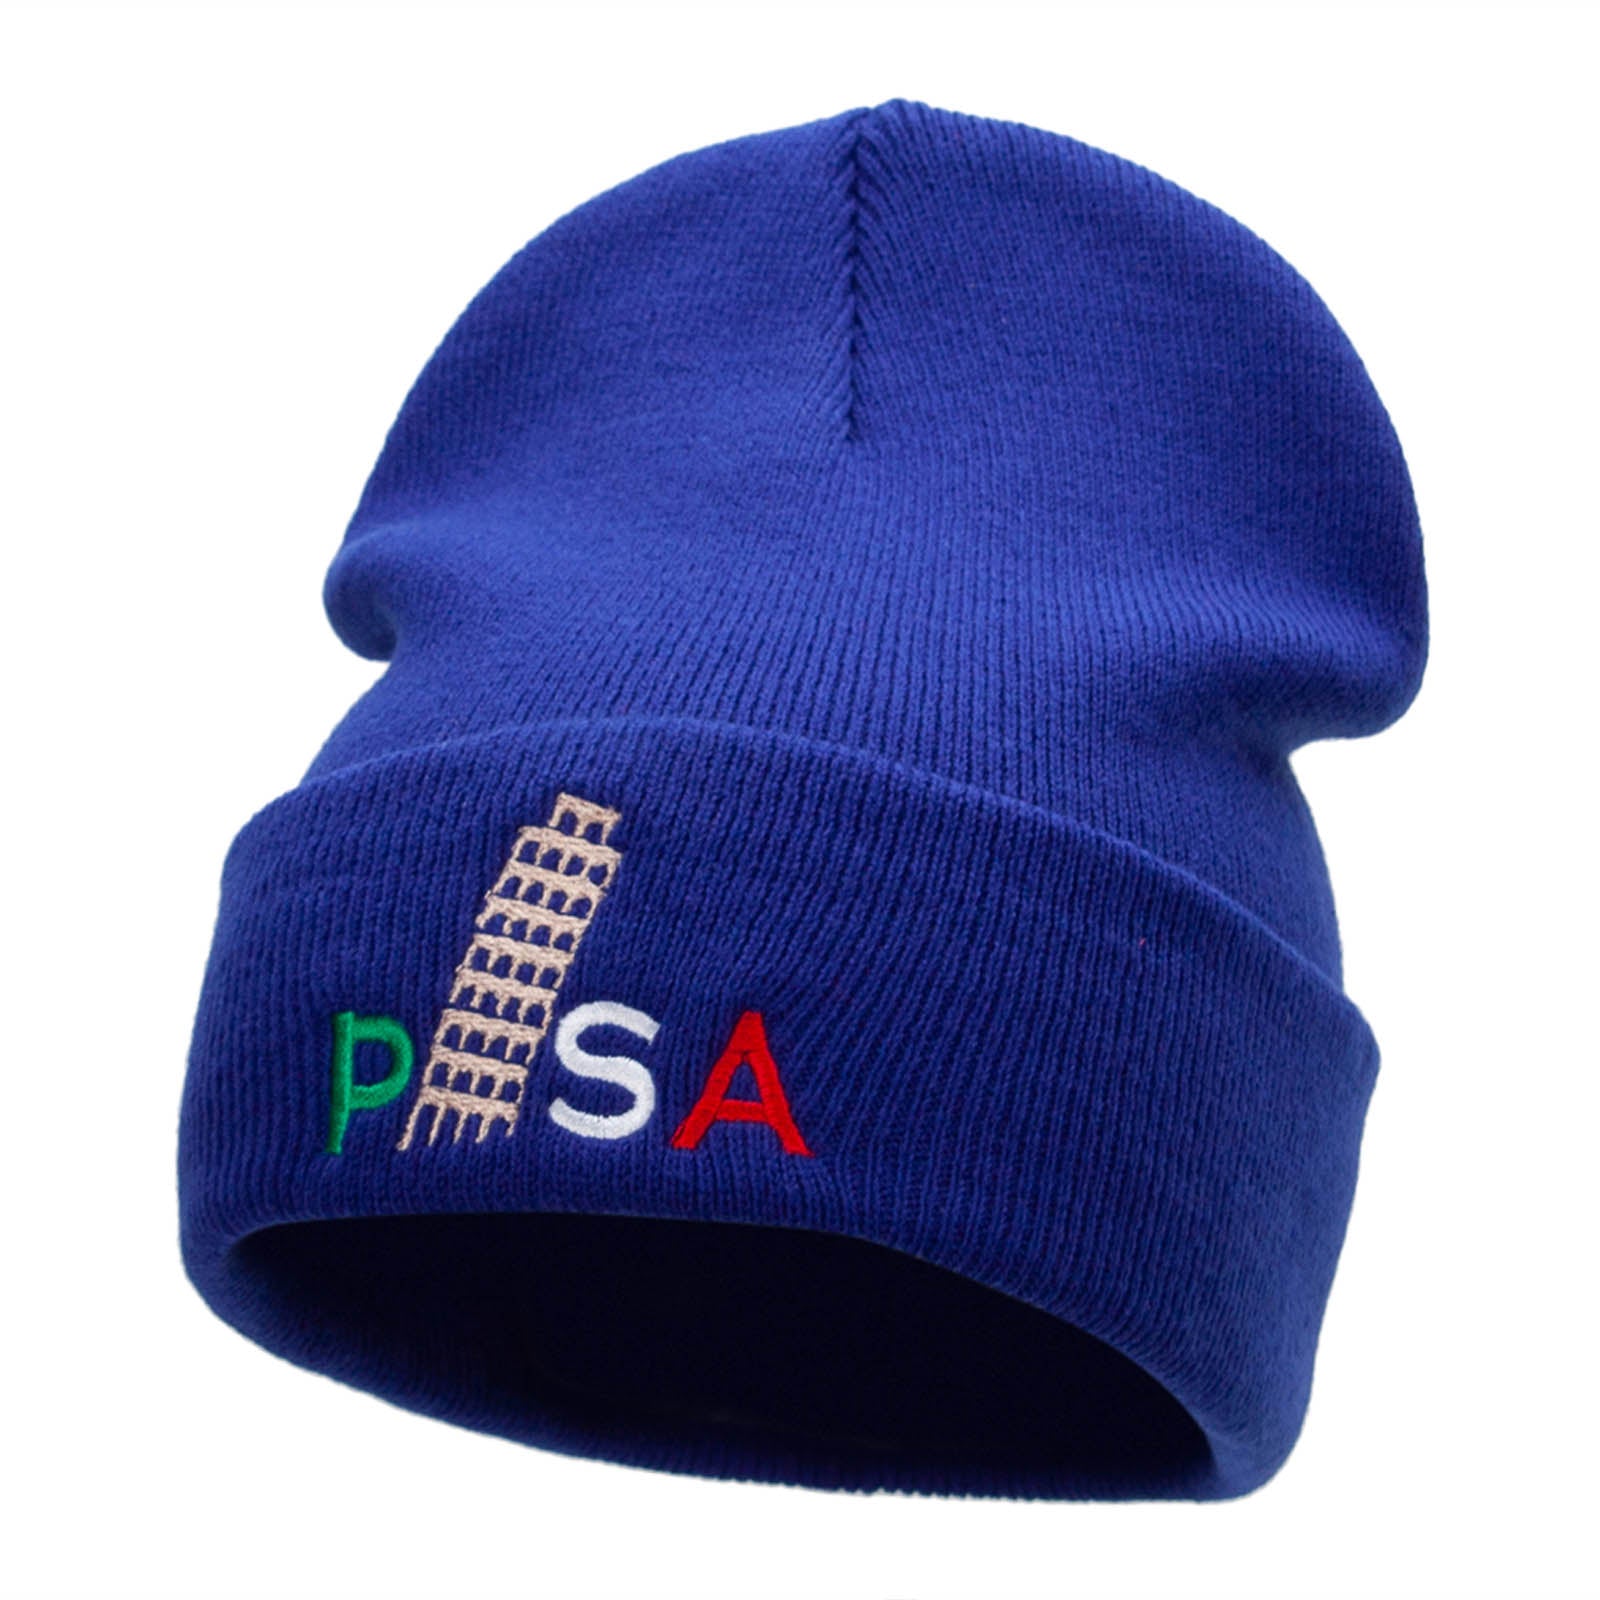 Pisa Embroidered 12 Inch Long Knitted Beanie - Royal OSFM